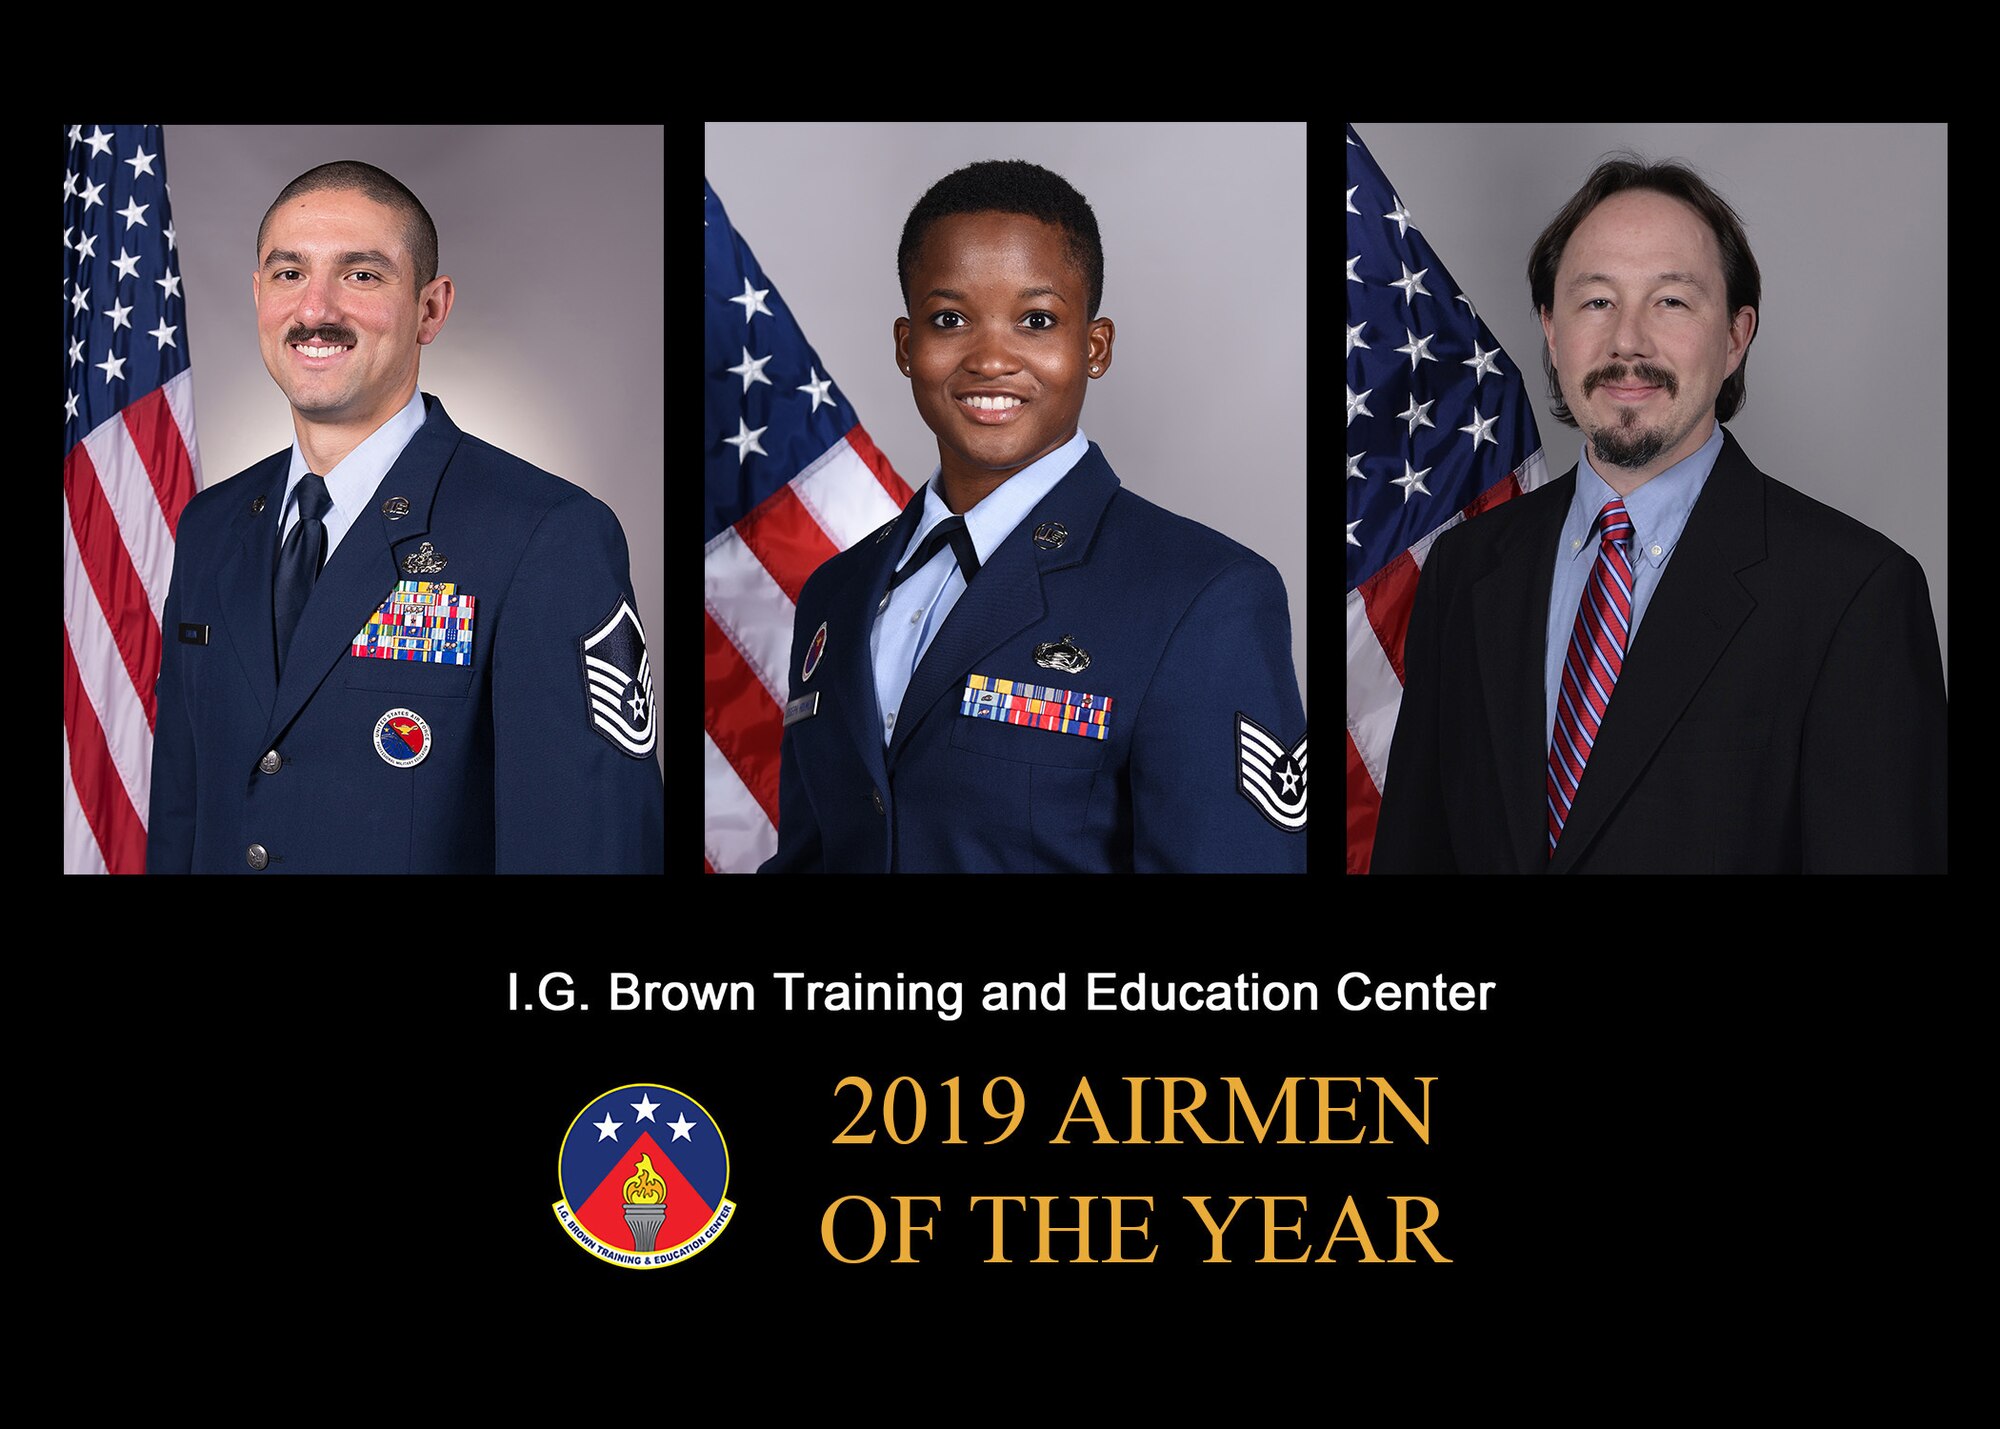 Airmen of the Year